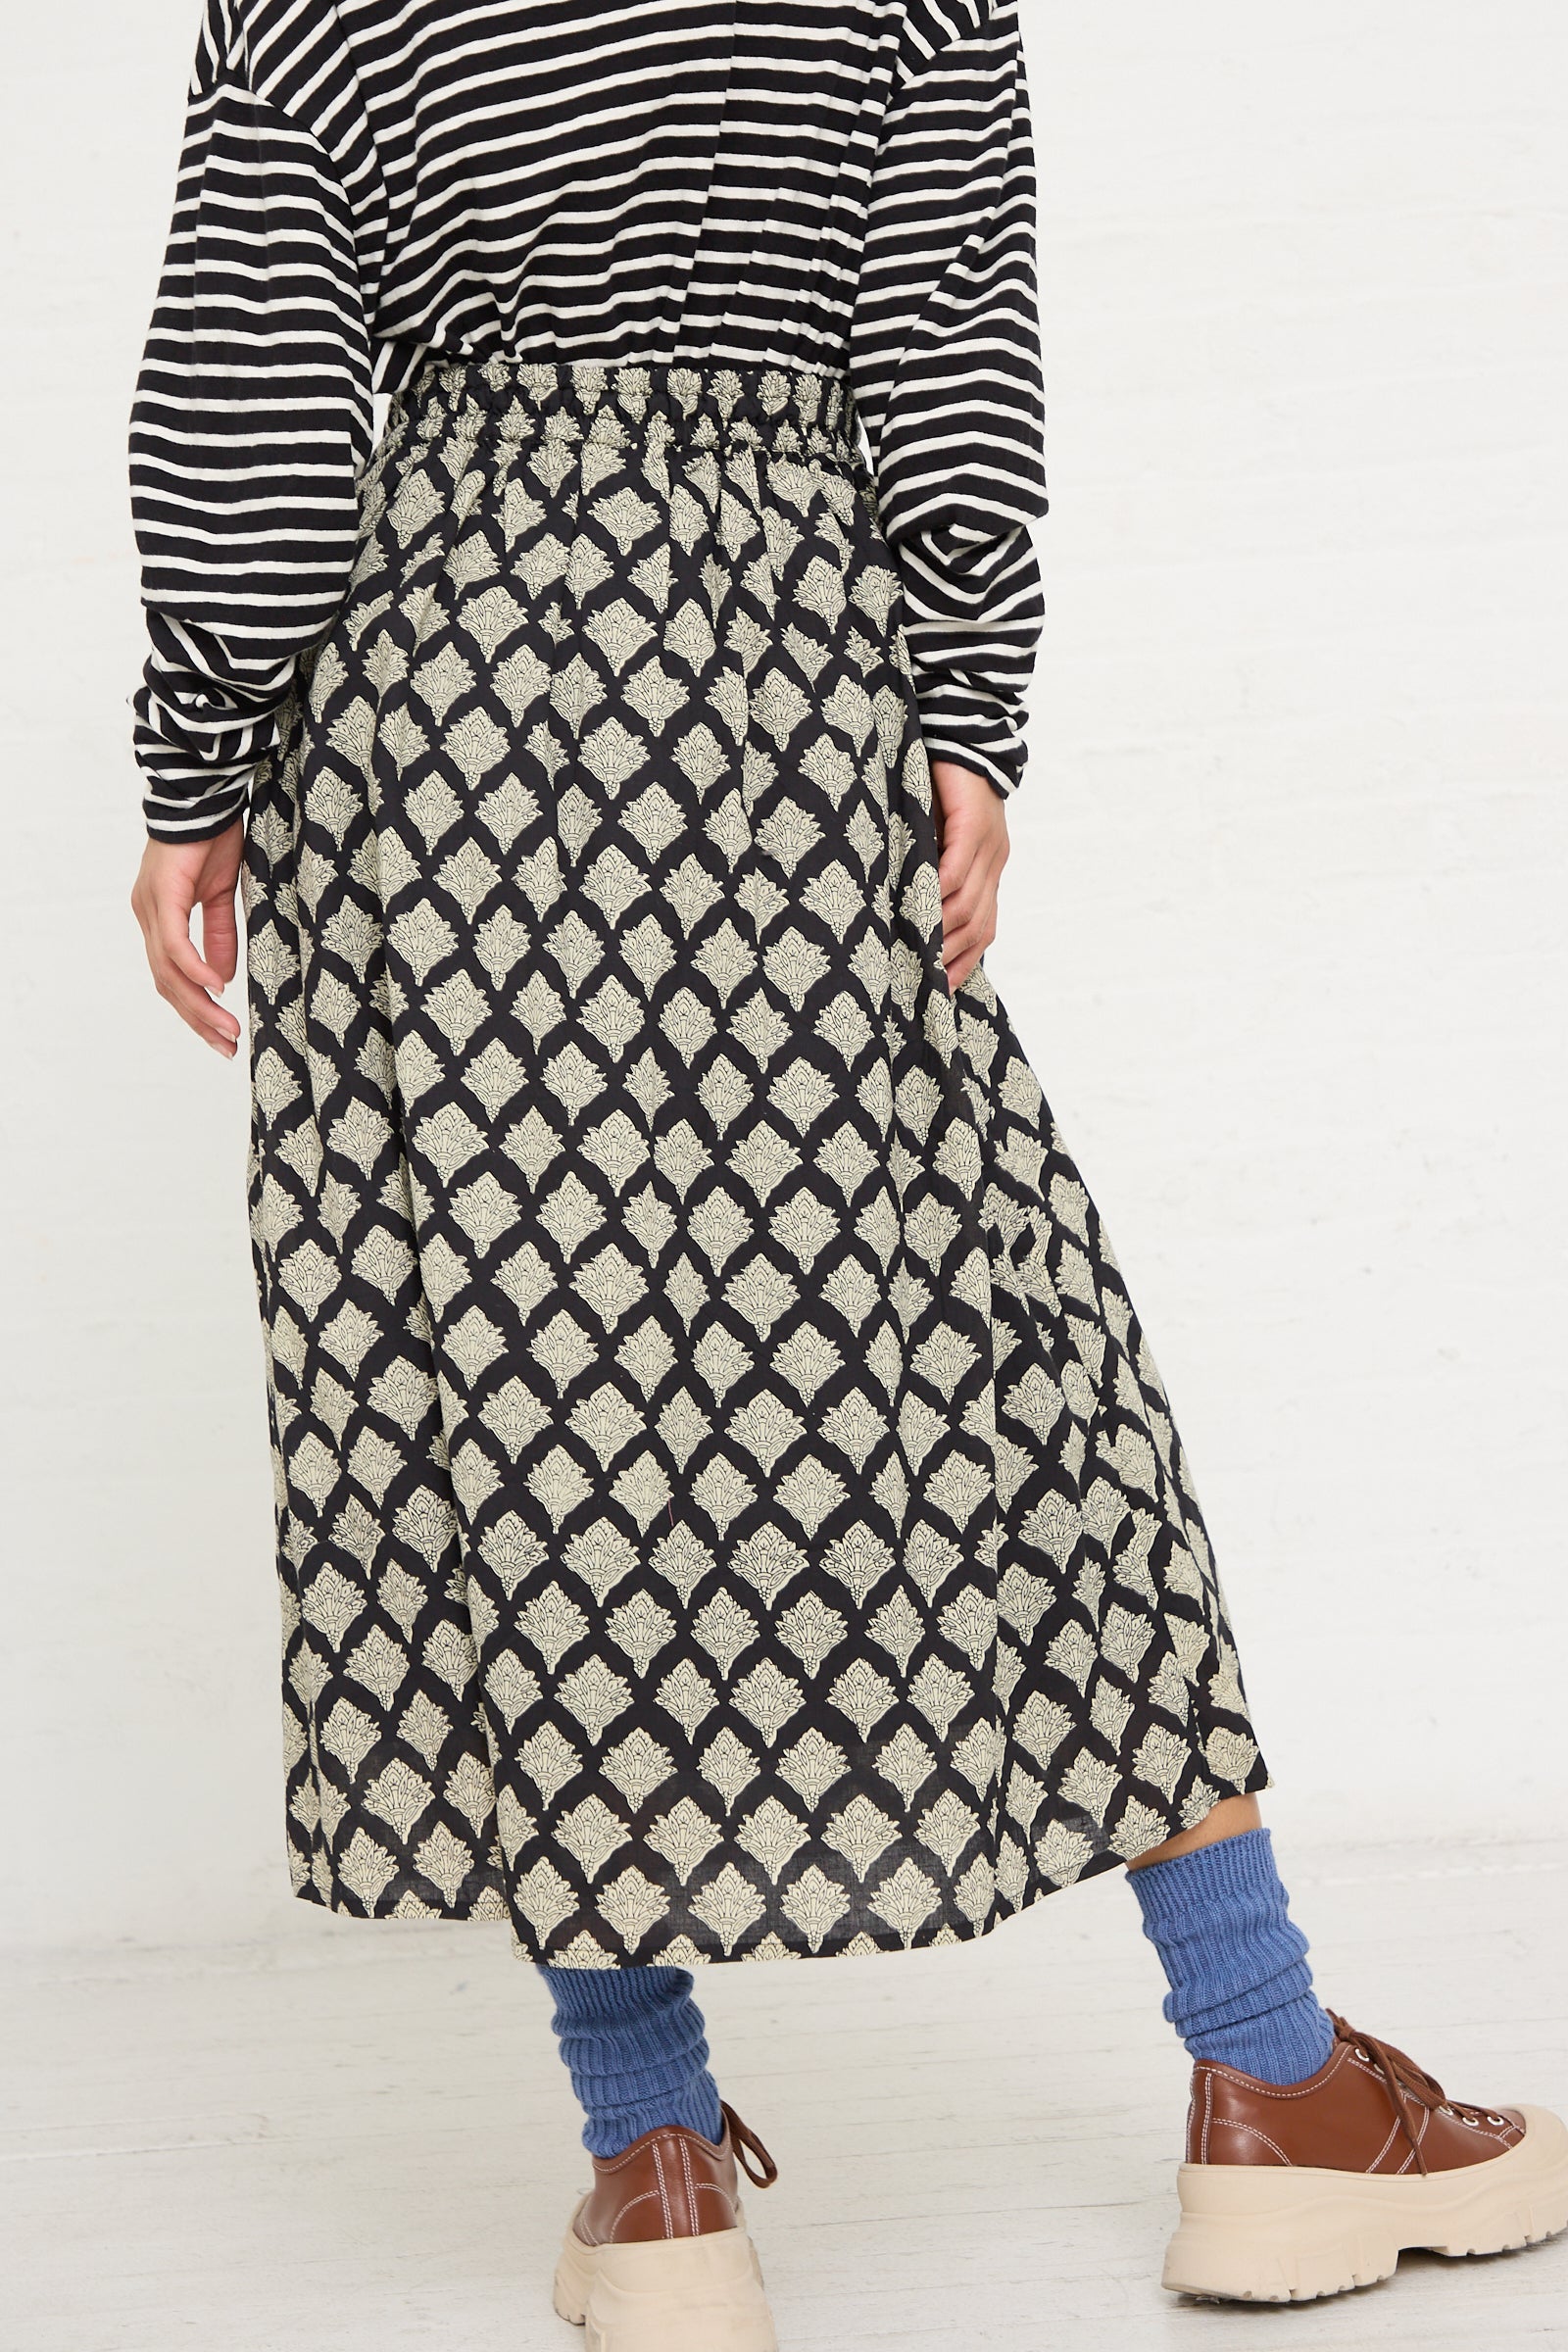 A person wearing a black and white striped top, an Ichi Antiquités Woven Cotton Indian Block Print Skirt in Black, blue socks, and brown shoes against a white background.